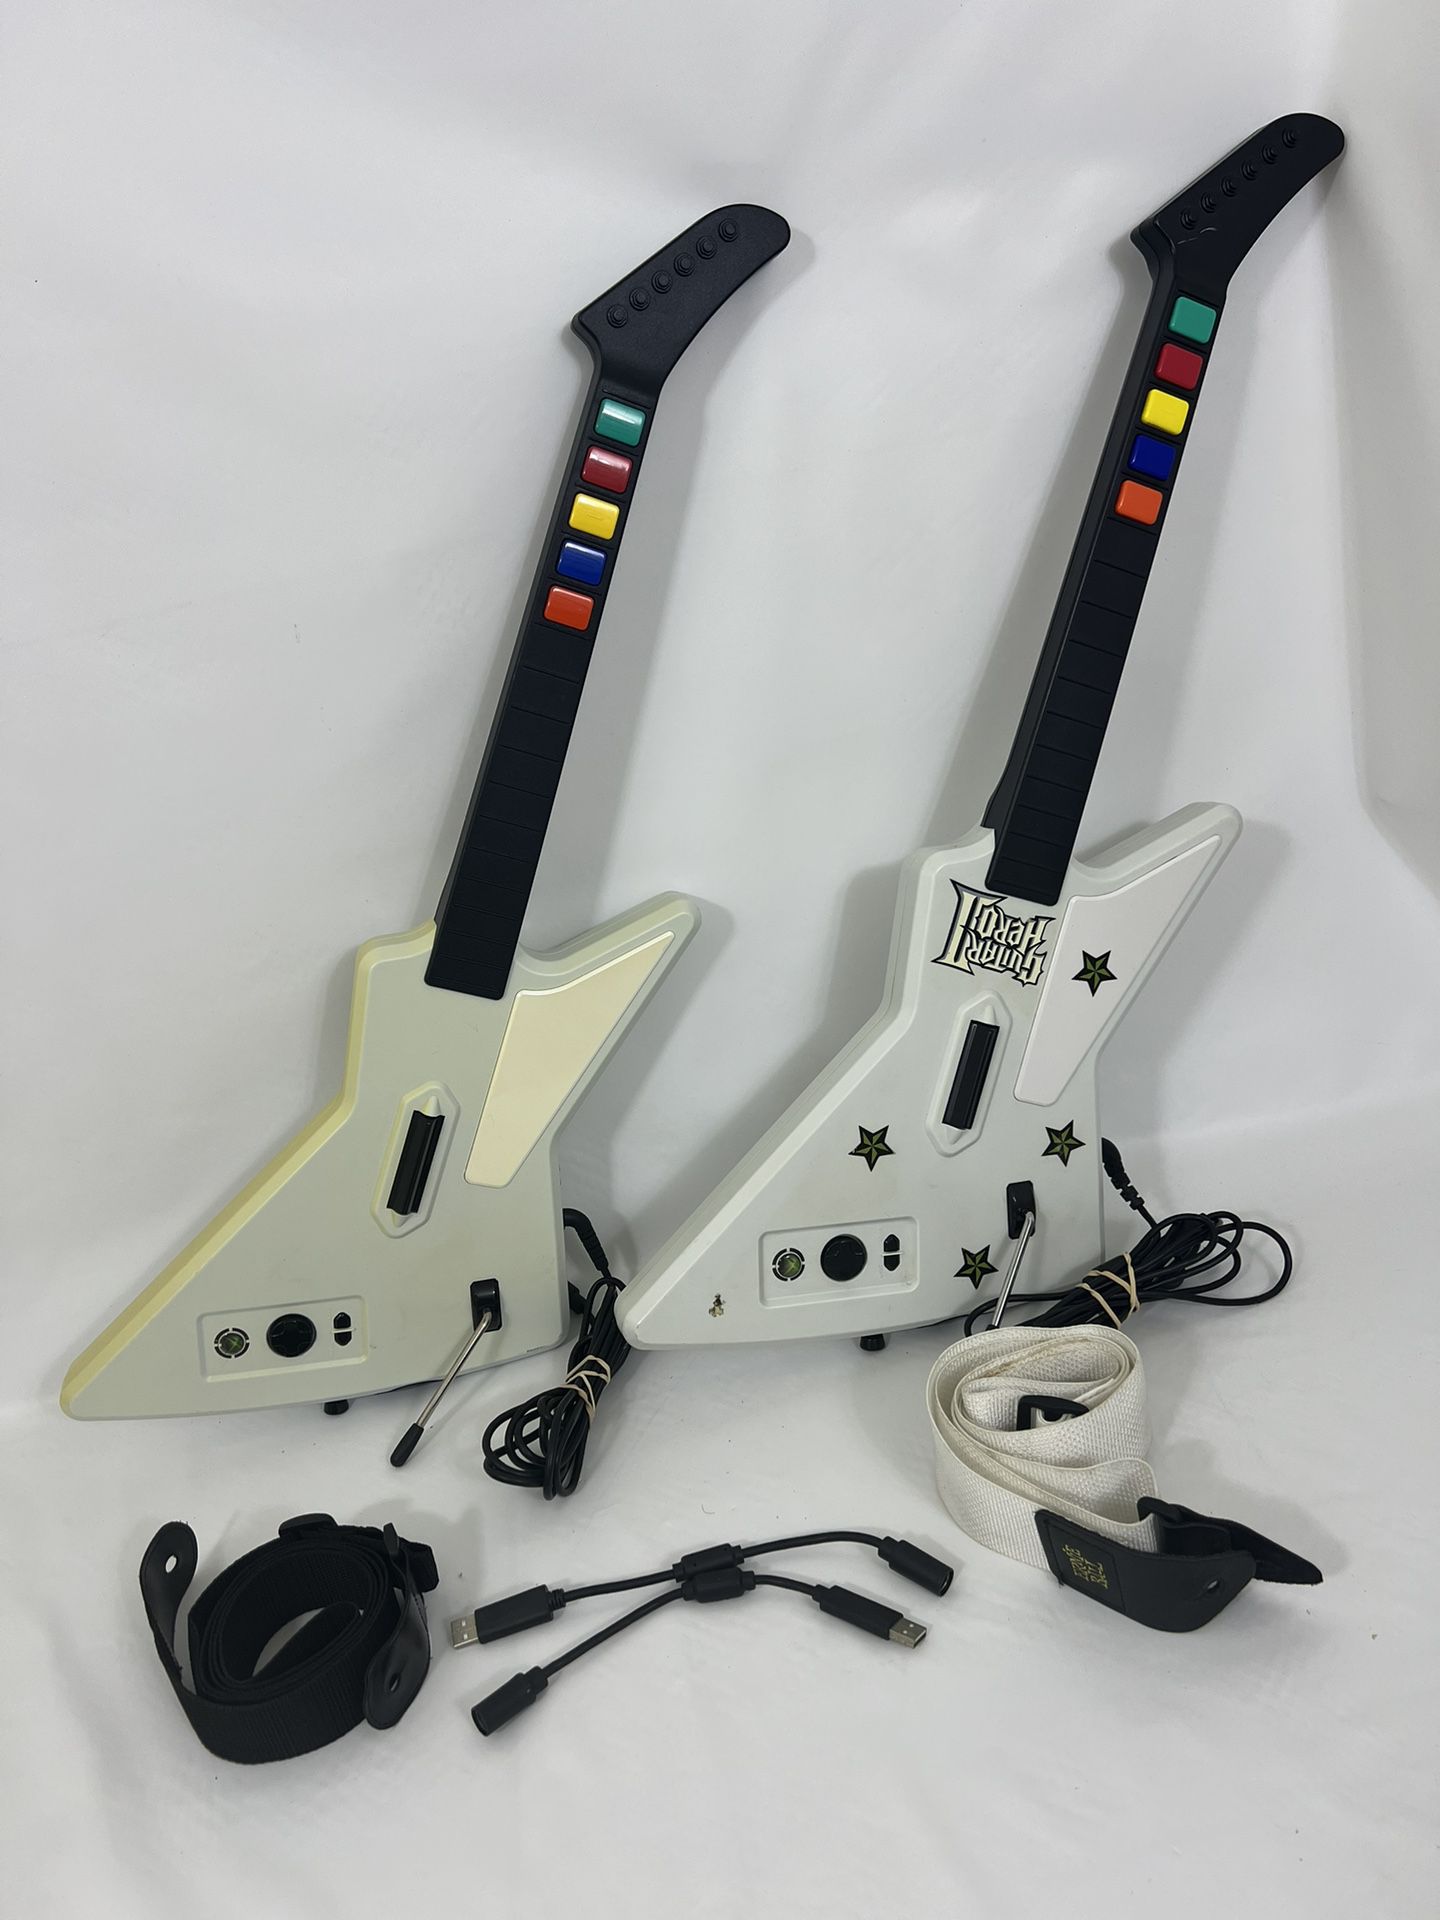 Xbox 360 Guitar Hero Xplorer Controllers 95065 95055 Red Octane Lot of 2 WORKING